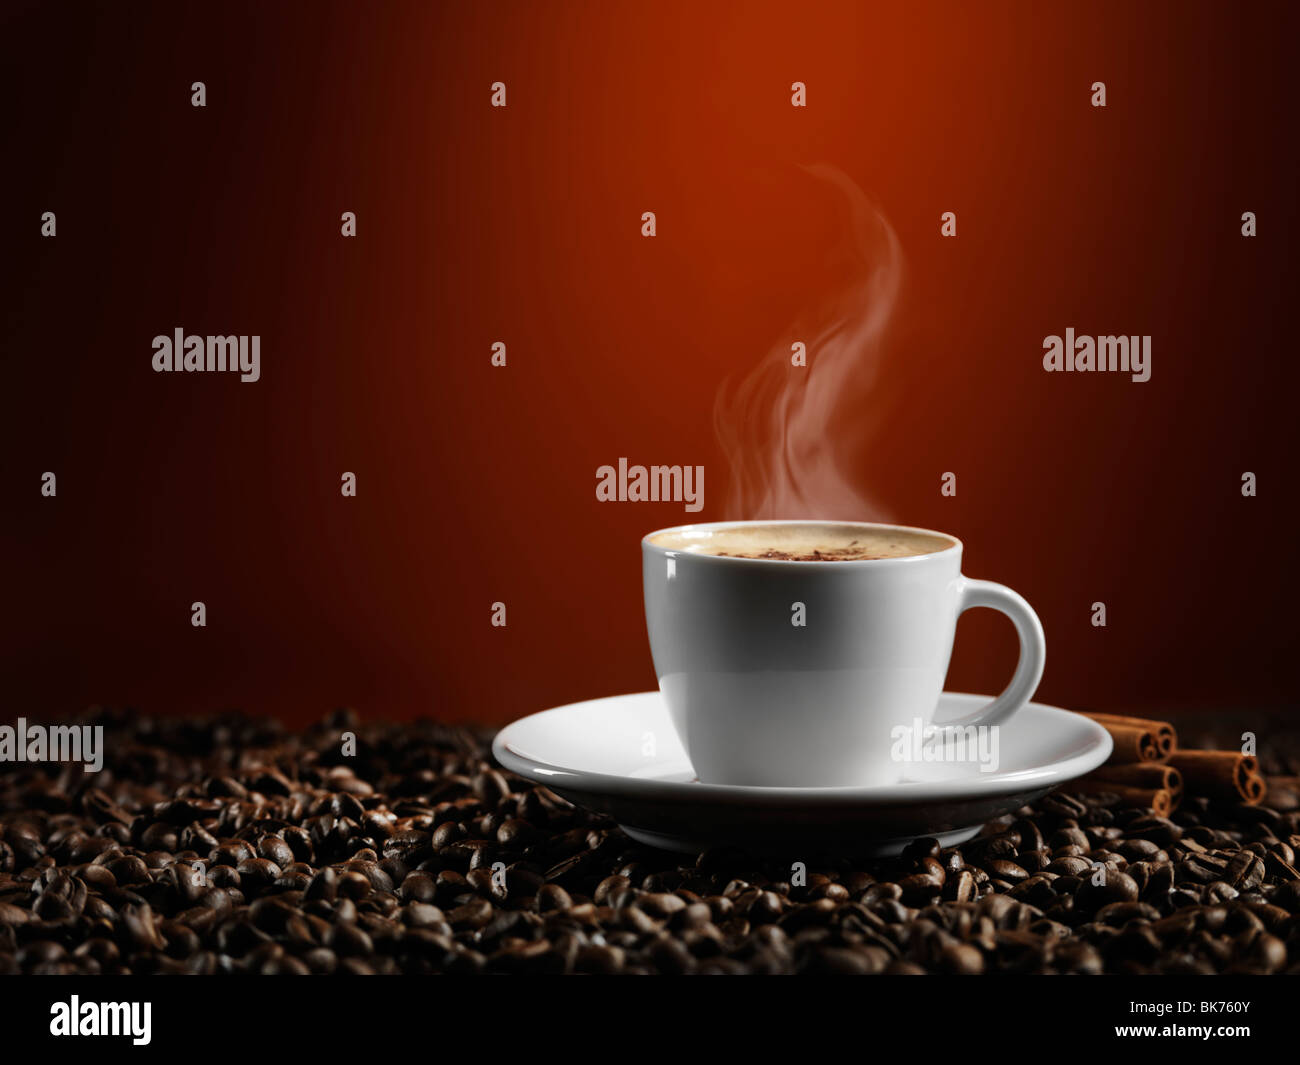 Cup of coffe latte standing on coffee beans isolated on dark red background Stock Photo